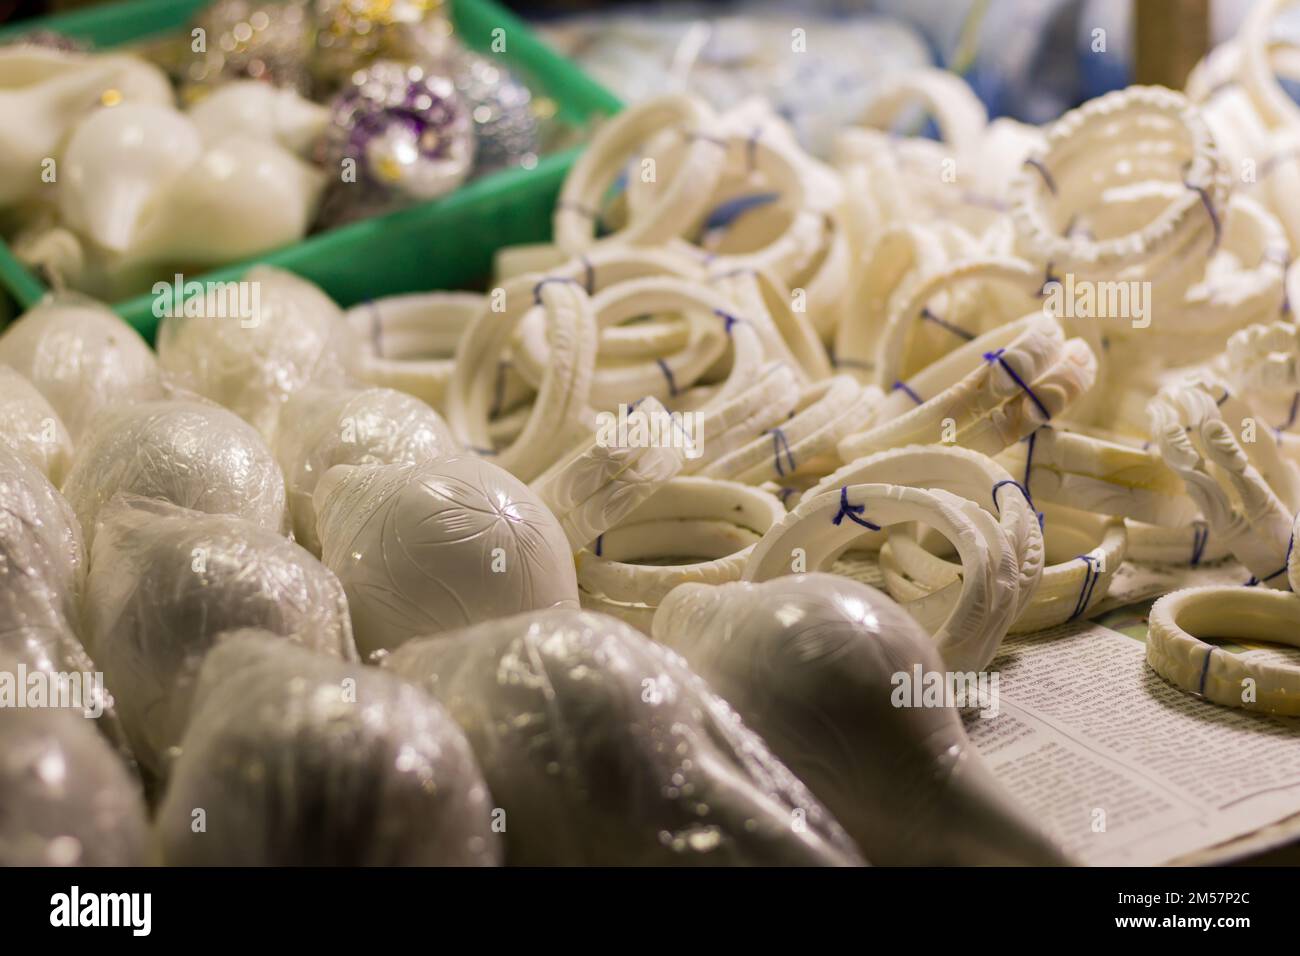 shankha or white bangles made of conch shells being sold near sea beach of digha. These bangles are traditional attire for married bengali women. Stock Photo